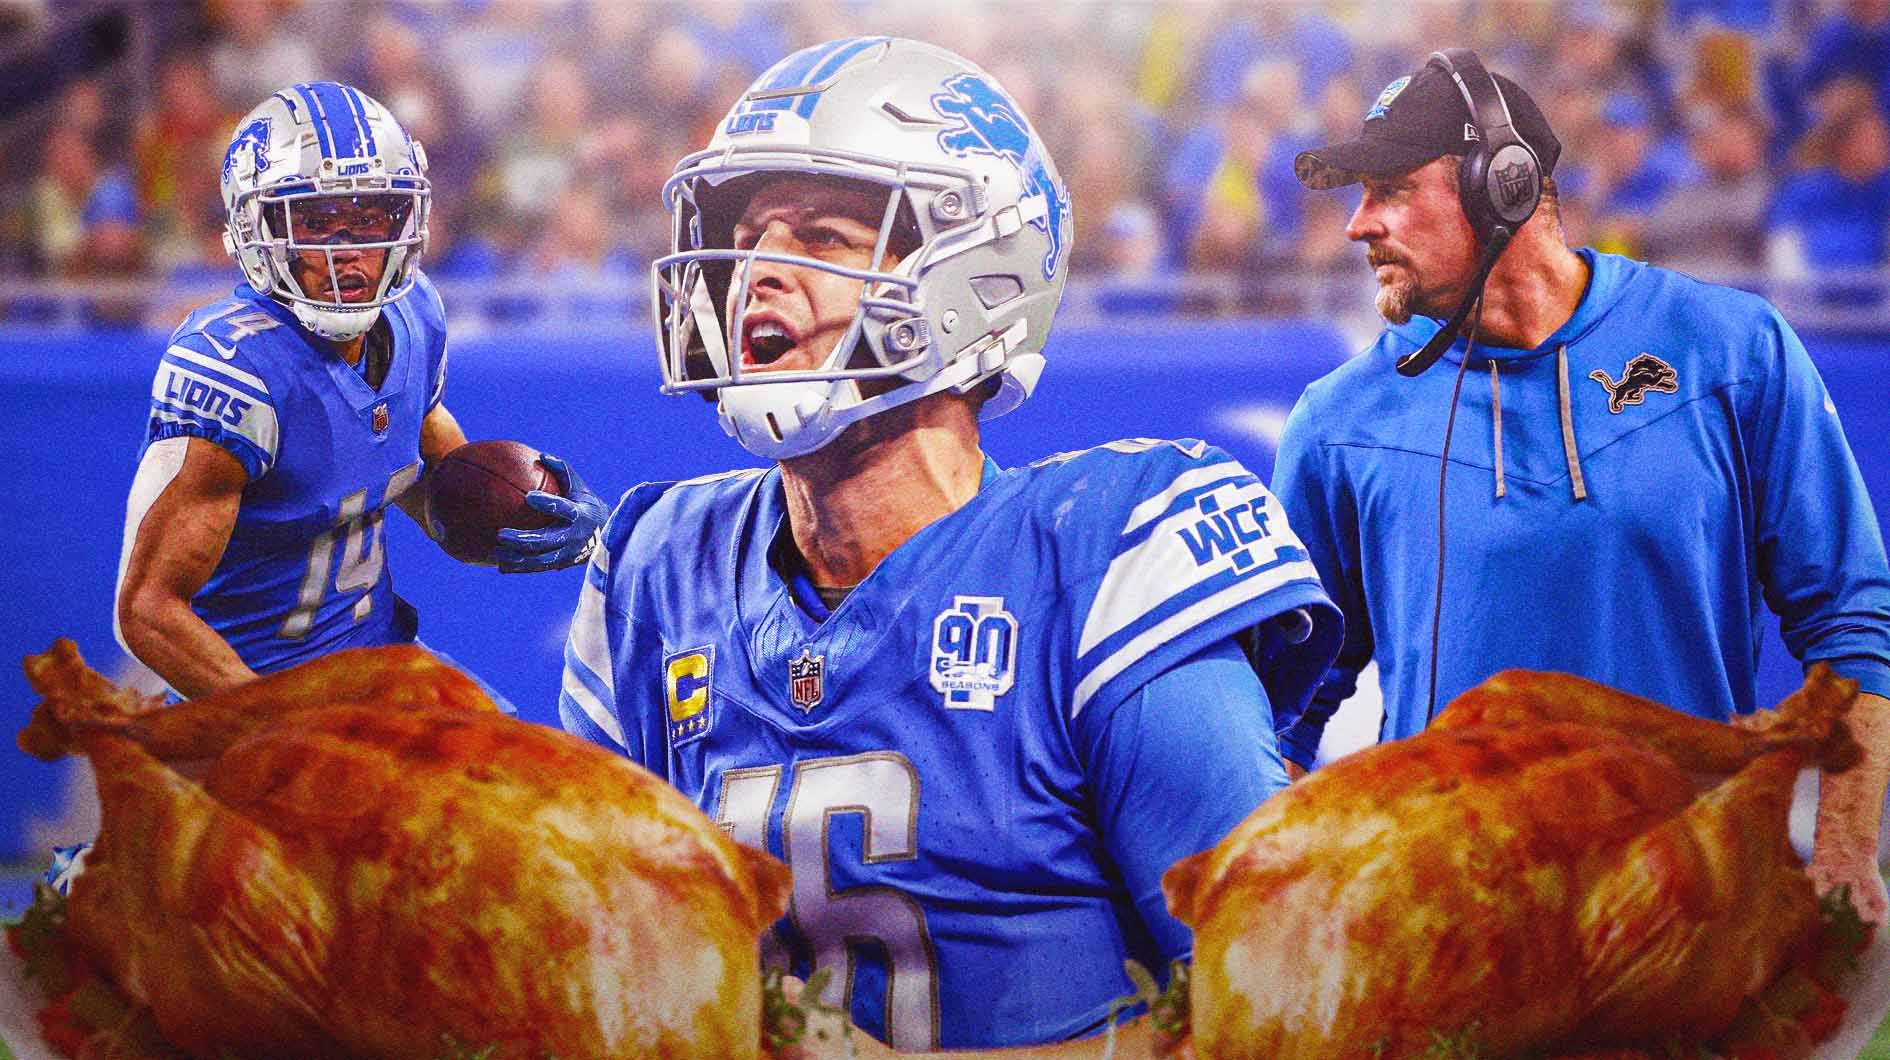 Lions Thanksgiving ticket prices for Packers game show big change